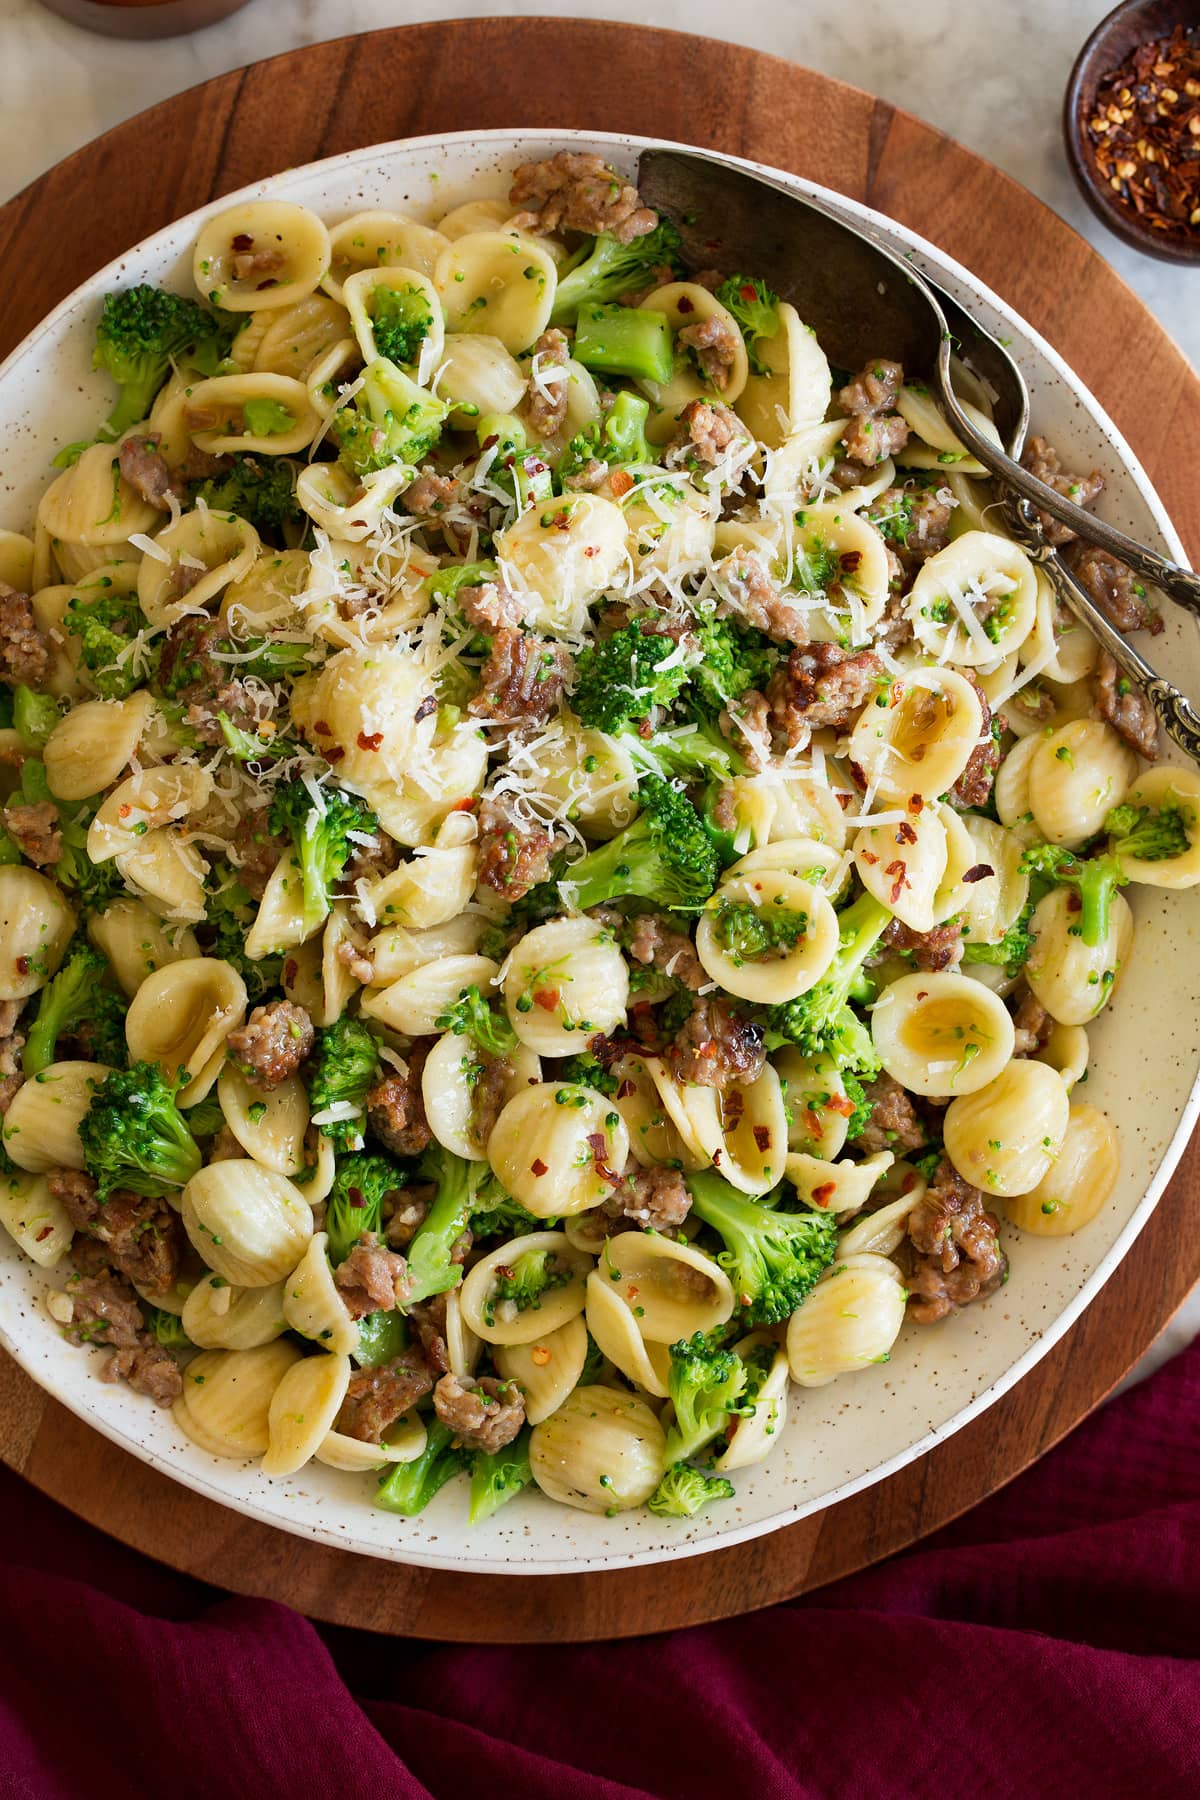 Photo: Orecchiette pasta with sausage and broccoli in a white serving bowl set over a wooden platter on a marble surface. It is shown from above.